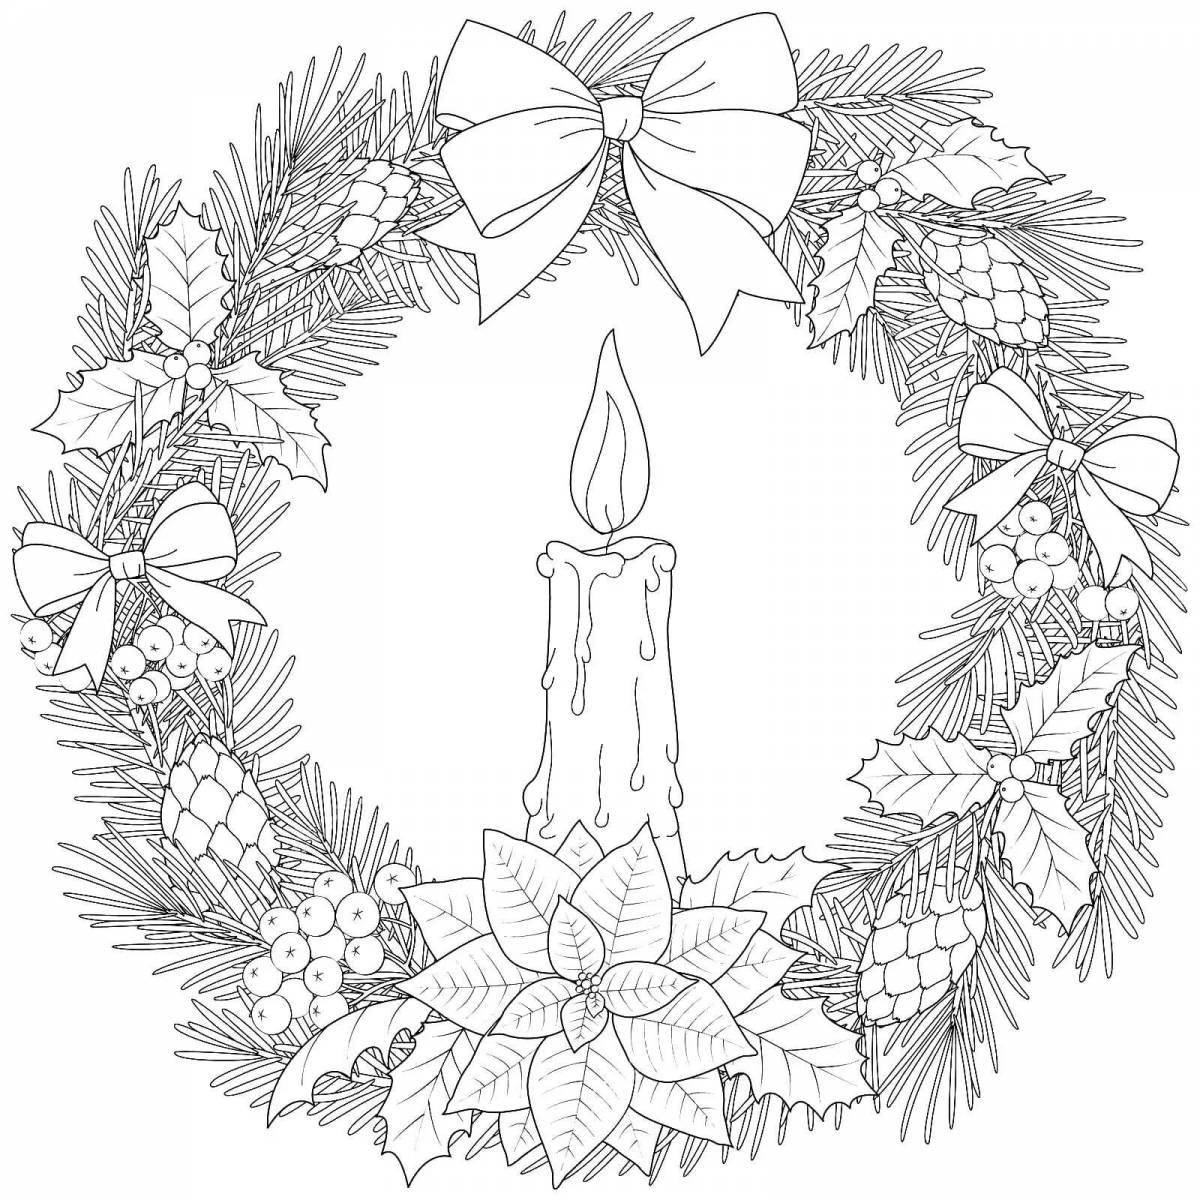 Adorable Christmas wreath coloring book for kids